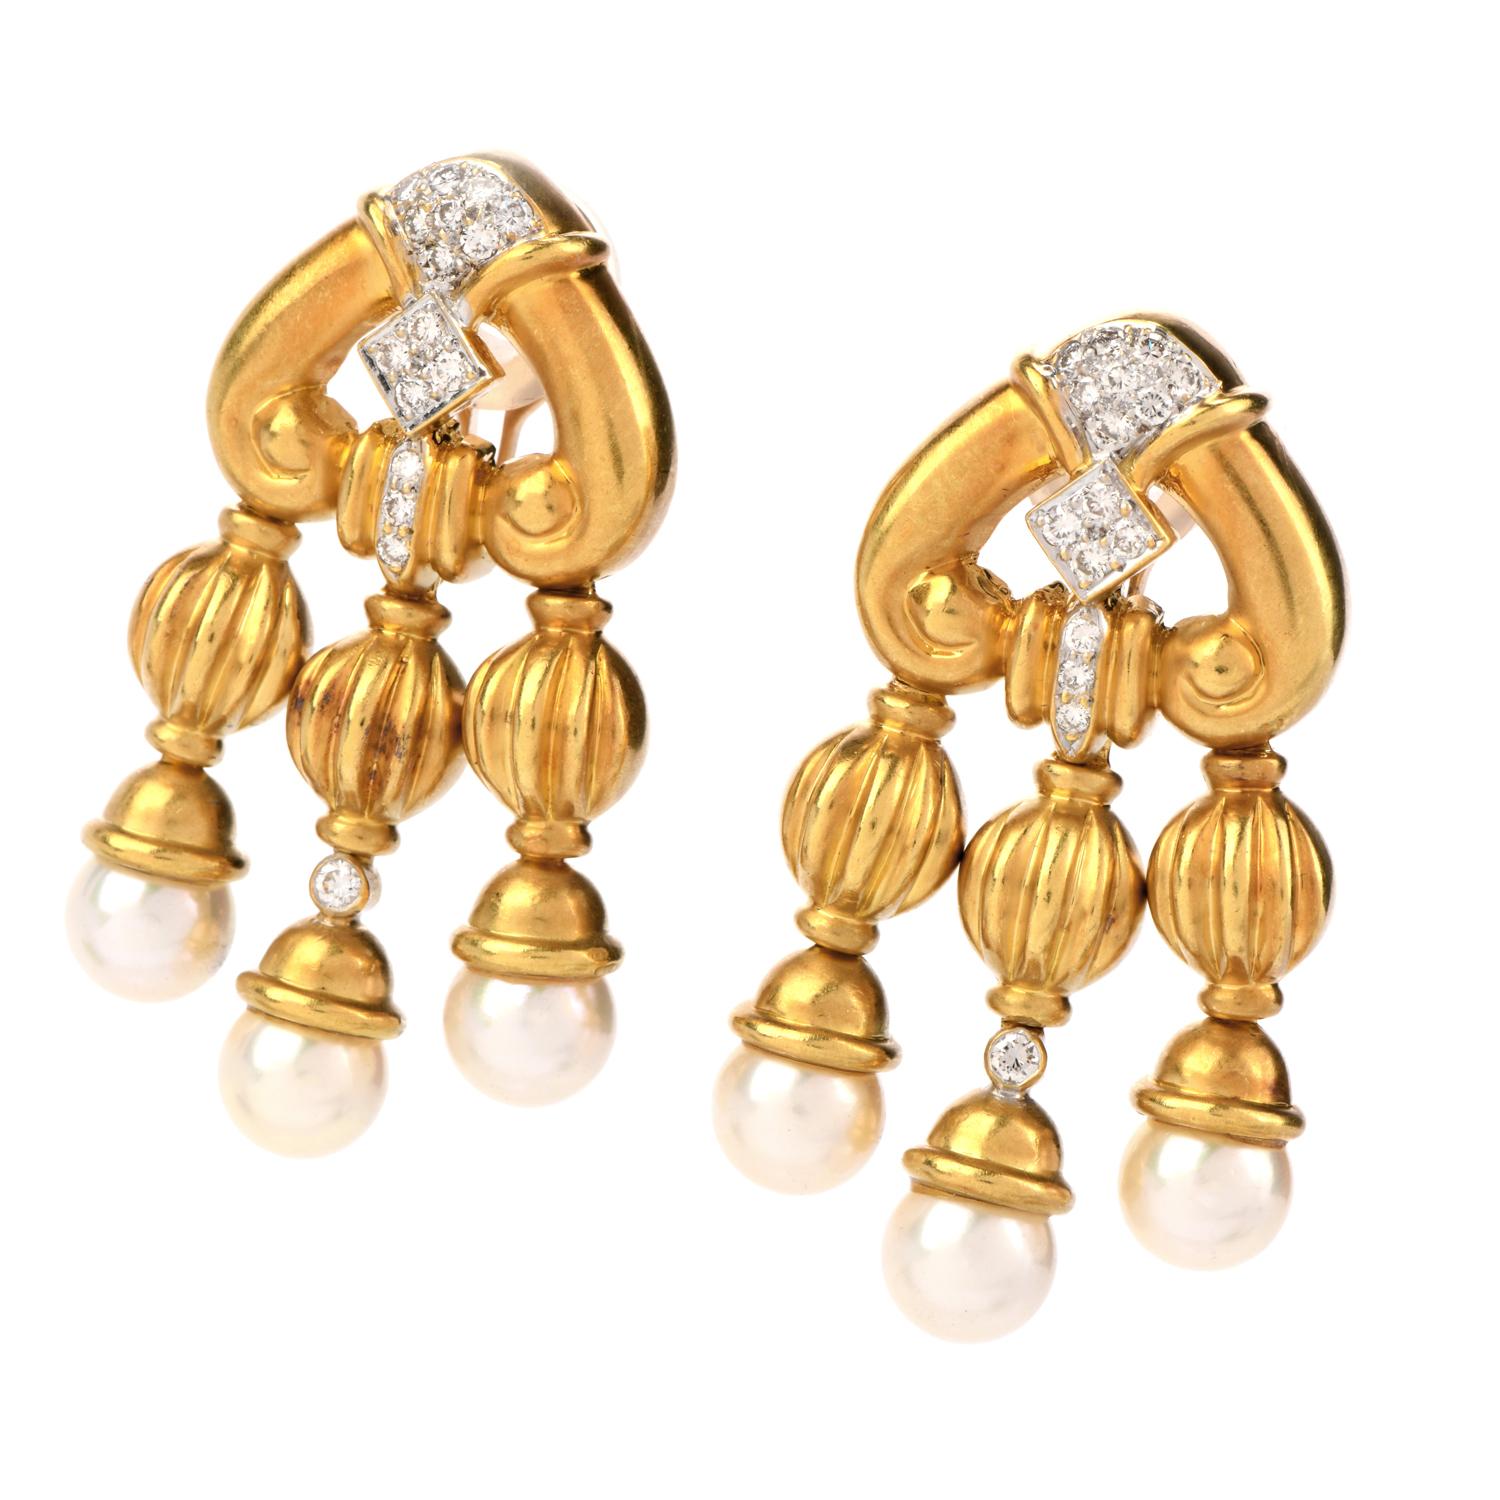  Live life like you’re the Prima Donna of the Opera, with these extravagant Vintage Diamond Pearl 18K Gold Chandelier Drop Earrings!  These earrings have 32 genuine diamonds, round cut, pave set, approximately 0.45 total carats; along with 3 genuine